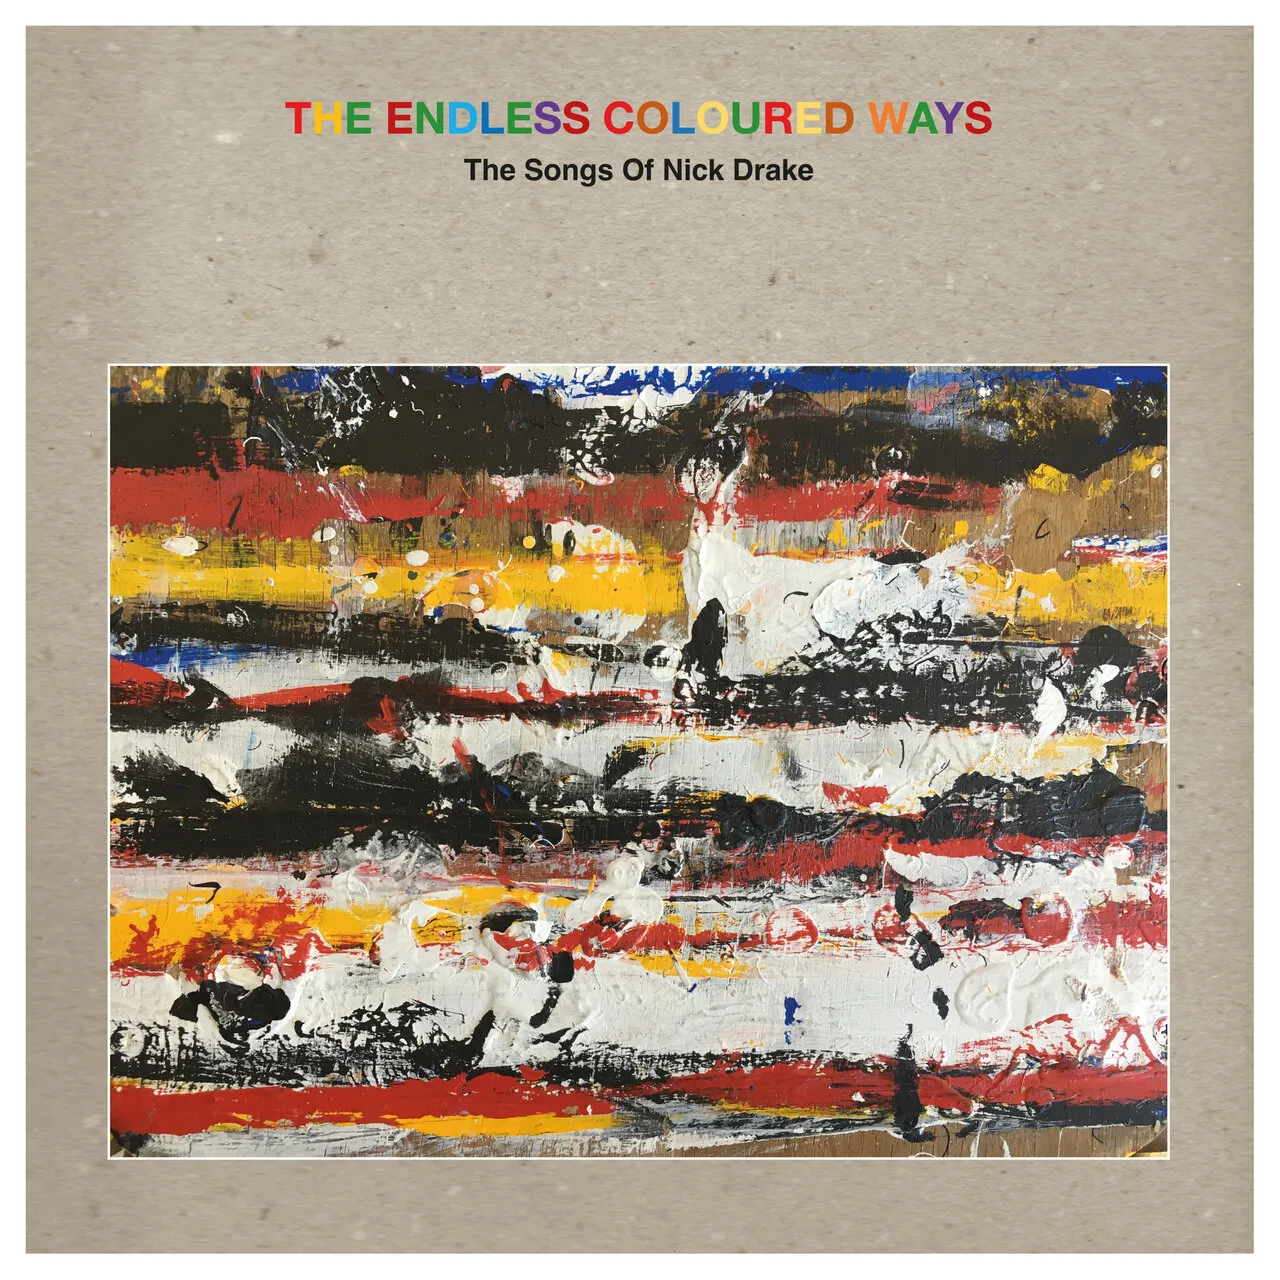 Various Artists The Endless Coloured Ways: The Songs of Nick Drake cover artwork